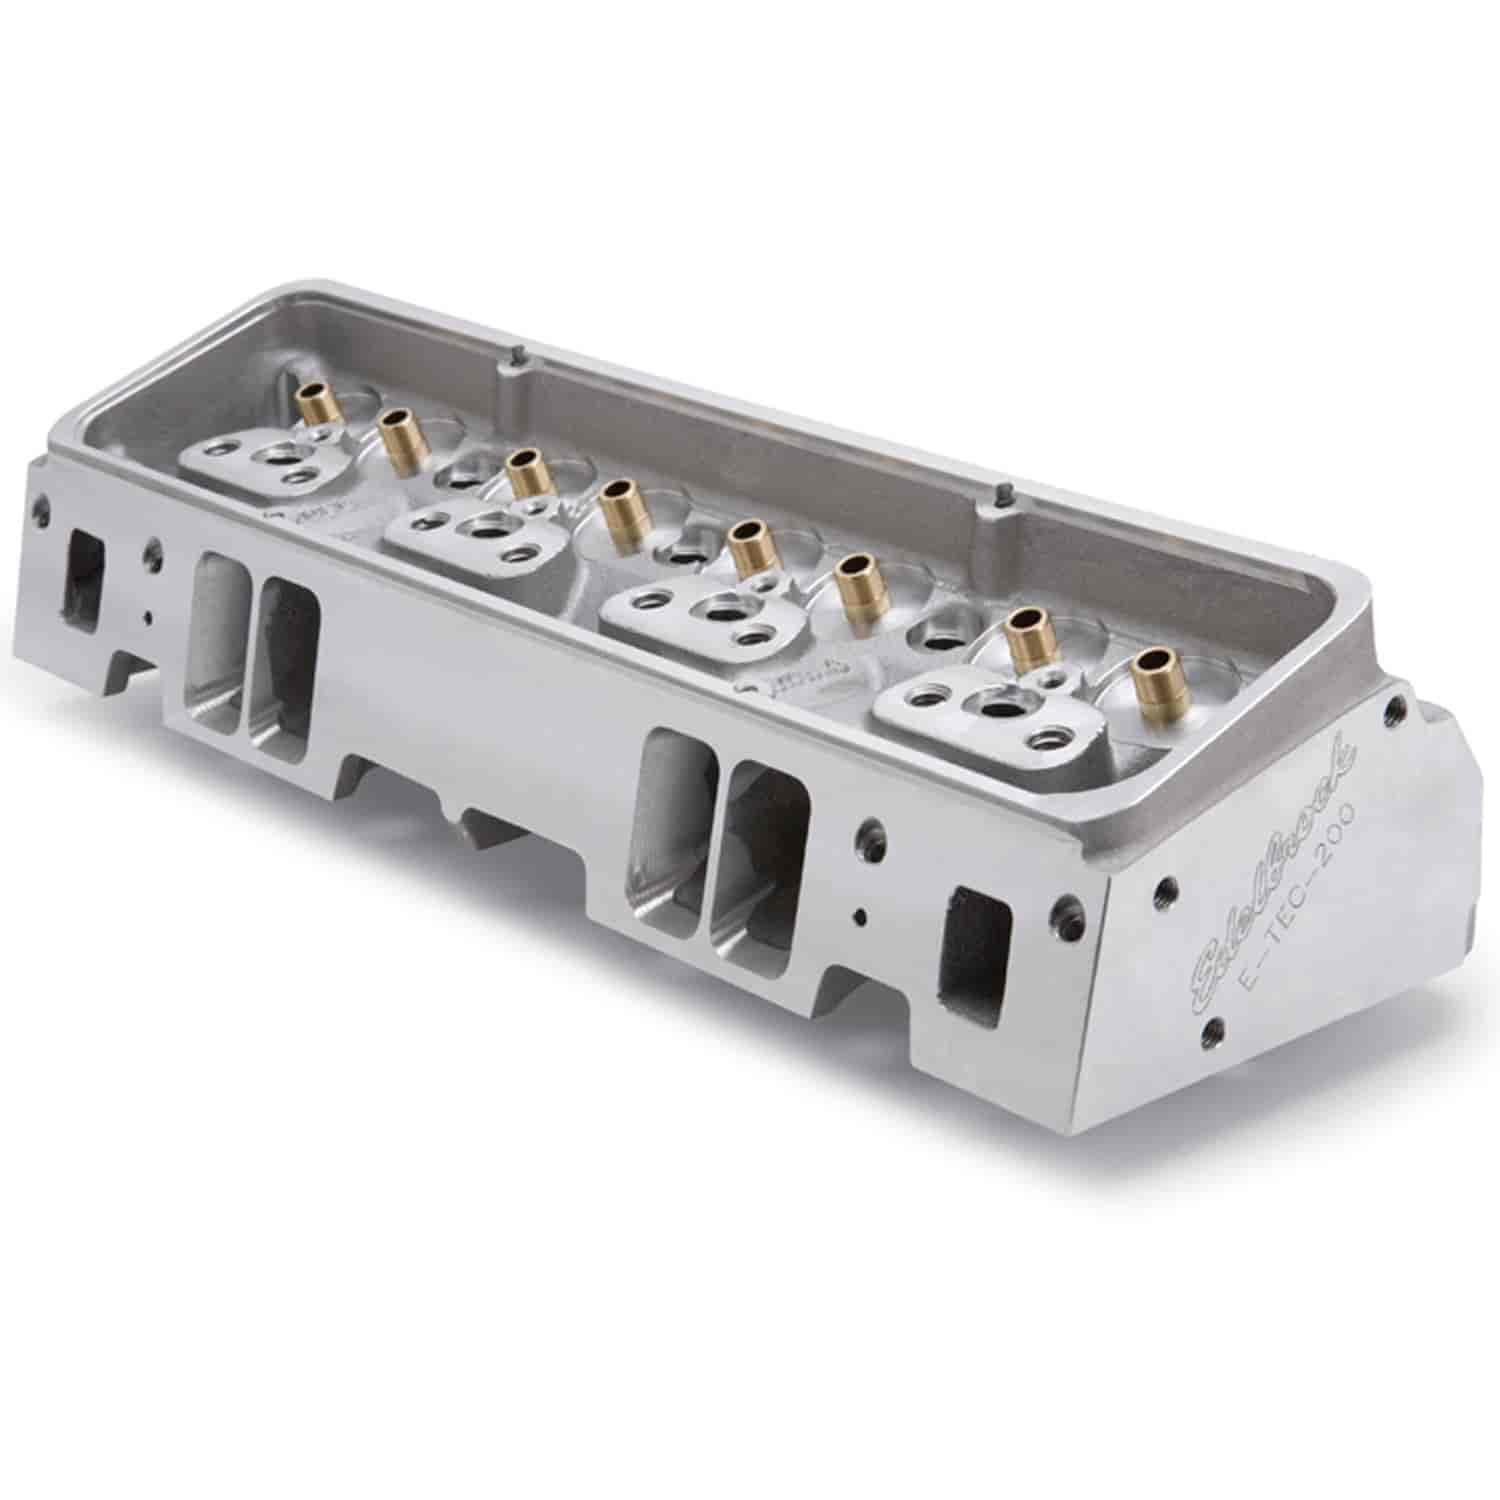 E-TEC 200 Aluminum Cylinder Head for Small Block Chevy Bare